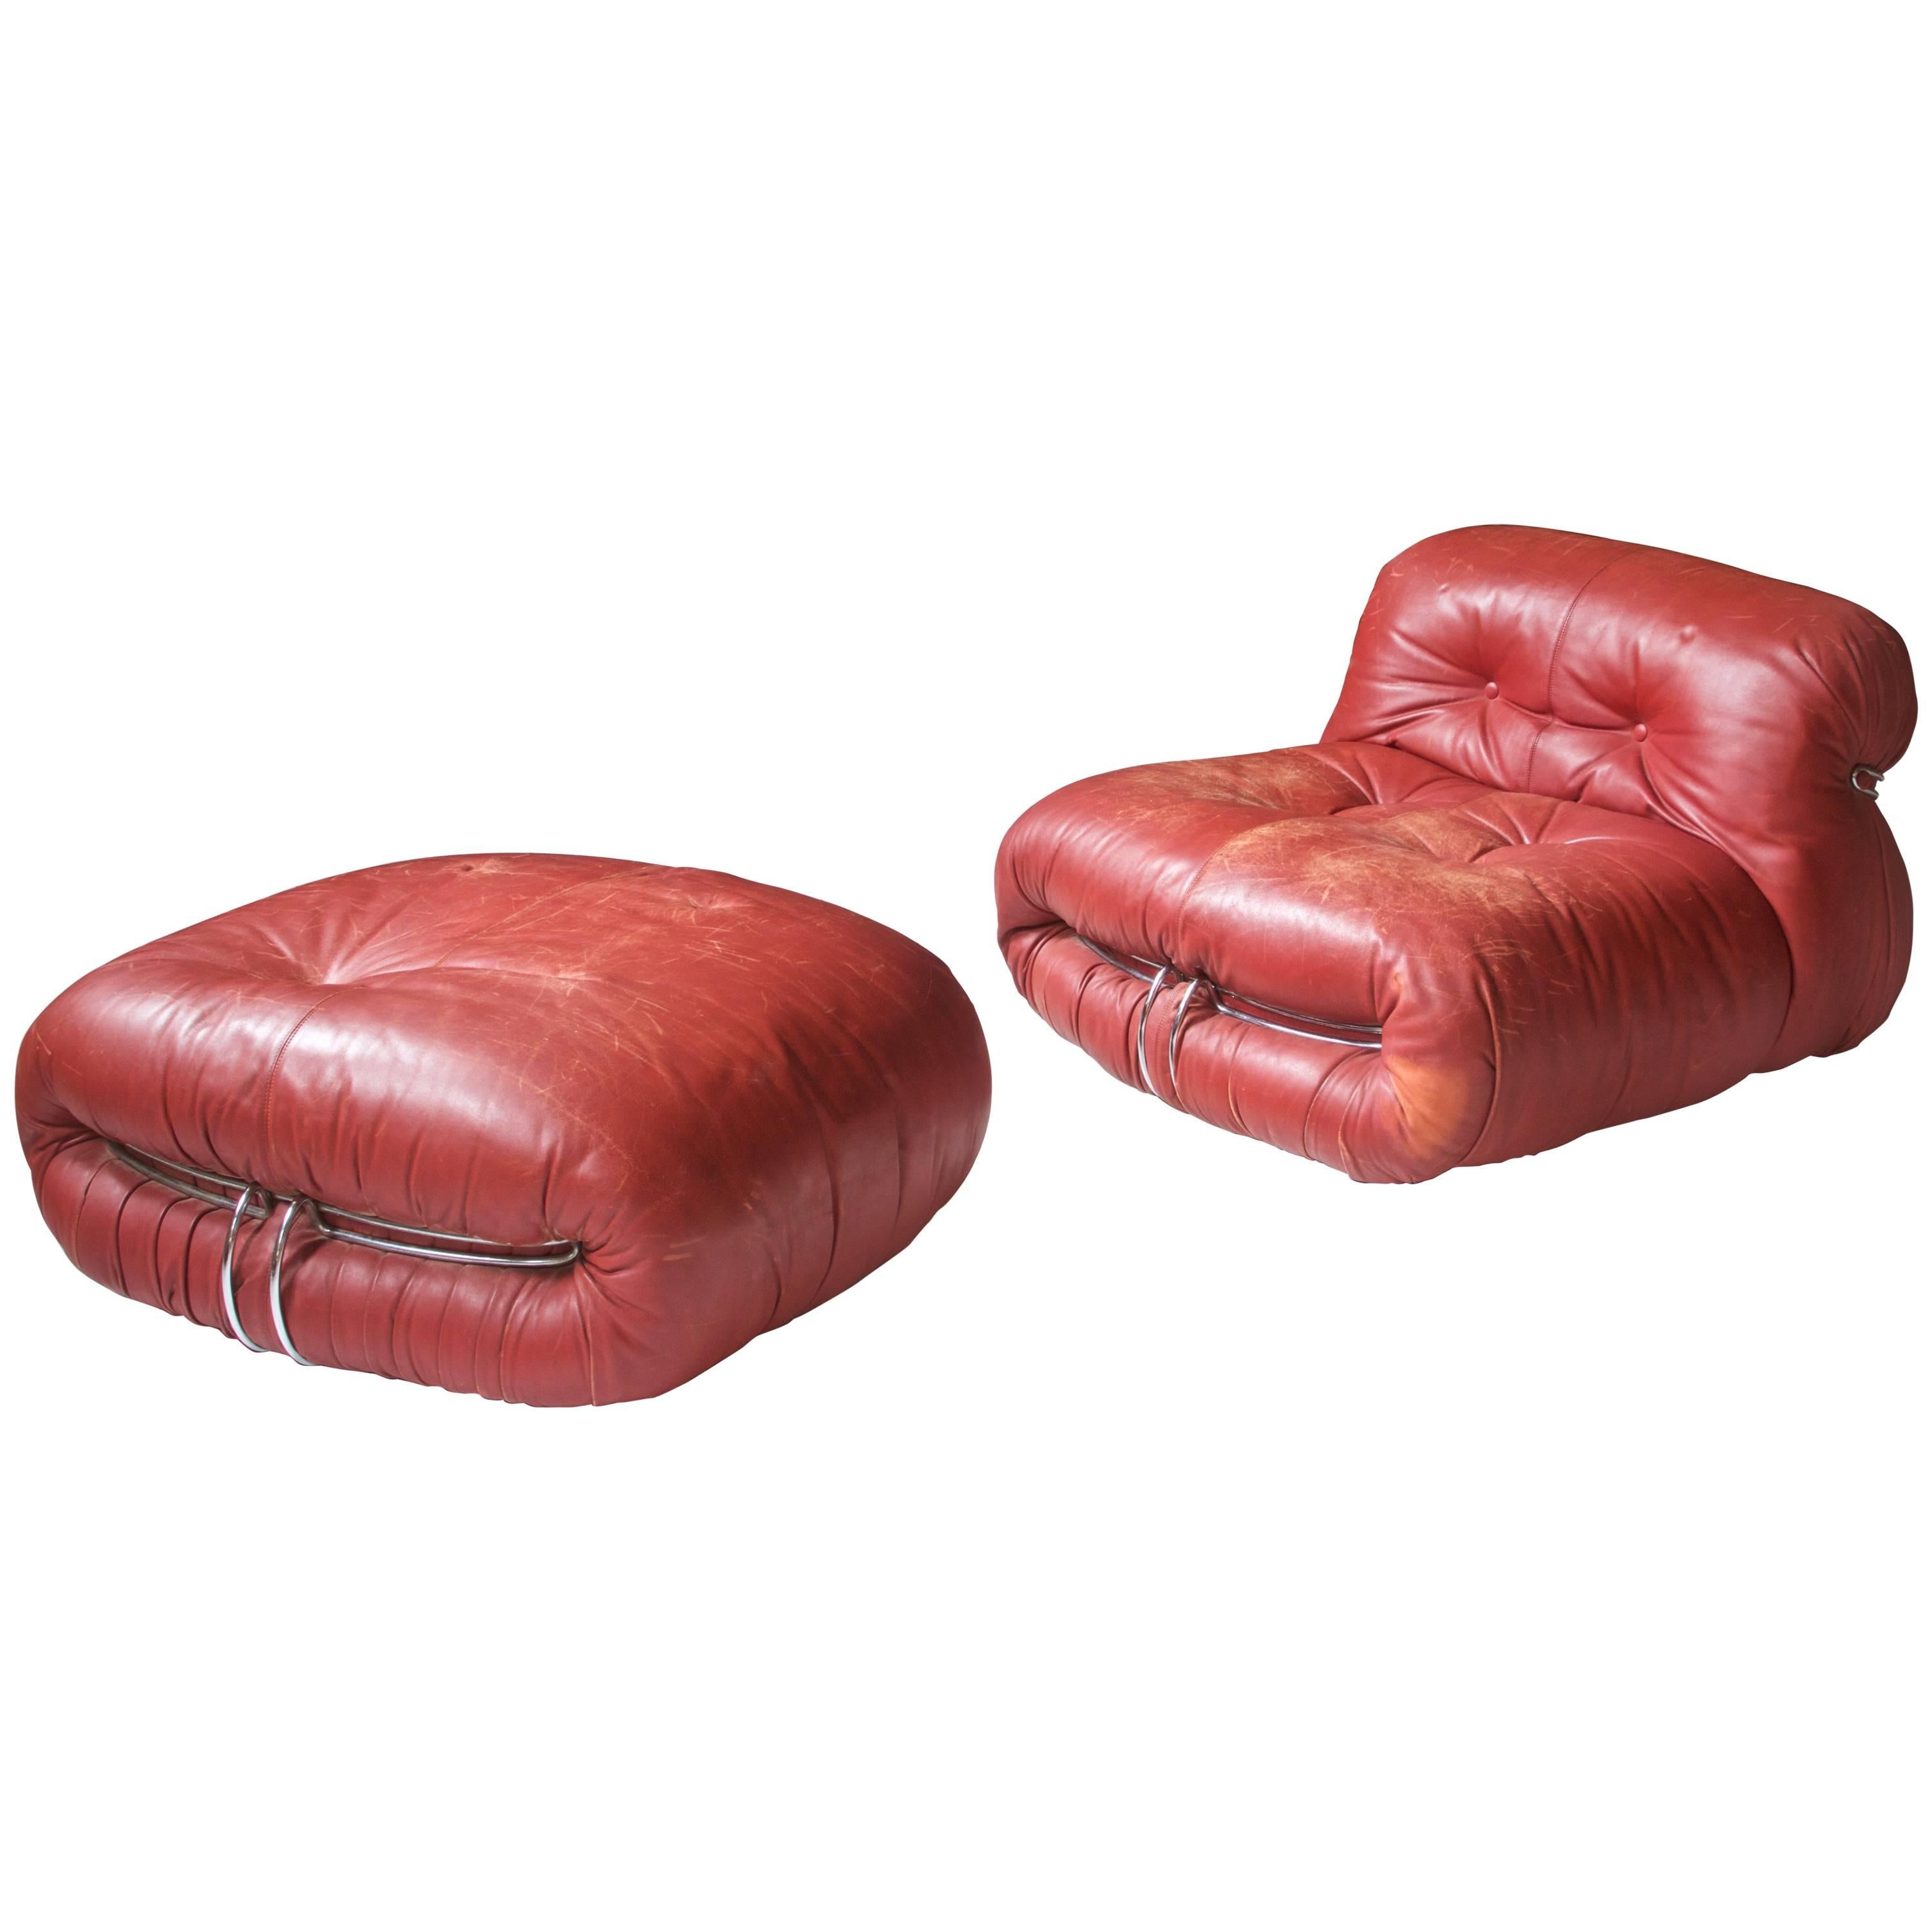 Distressed Red Leather "Soriana" Lounge Chair and Ottoman, Scarpa, 1970